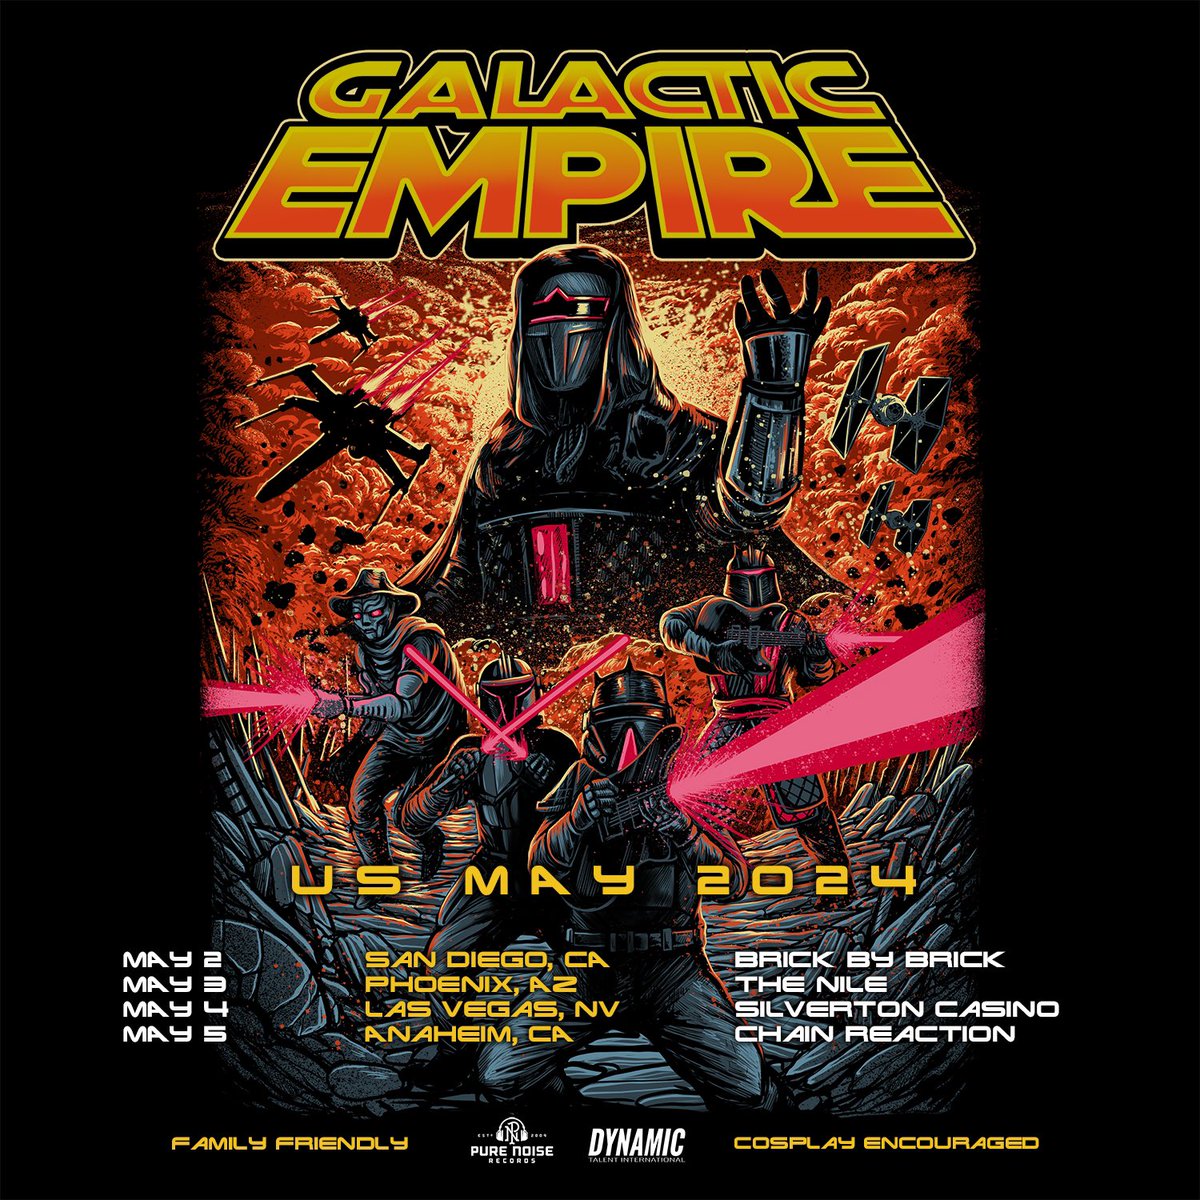 🚨 ATTENTION WEST COAST 🚨 You asked for it, the Emperor has delivered! We will return to your region this May to crush any remaining rebel insurgents. Tickets go on sale this Friday, February 2 at 11AM PST #starwars #galacticempire #heavymetal #metal #tour #purenoiserecs